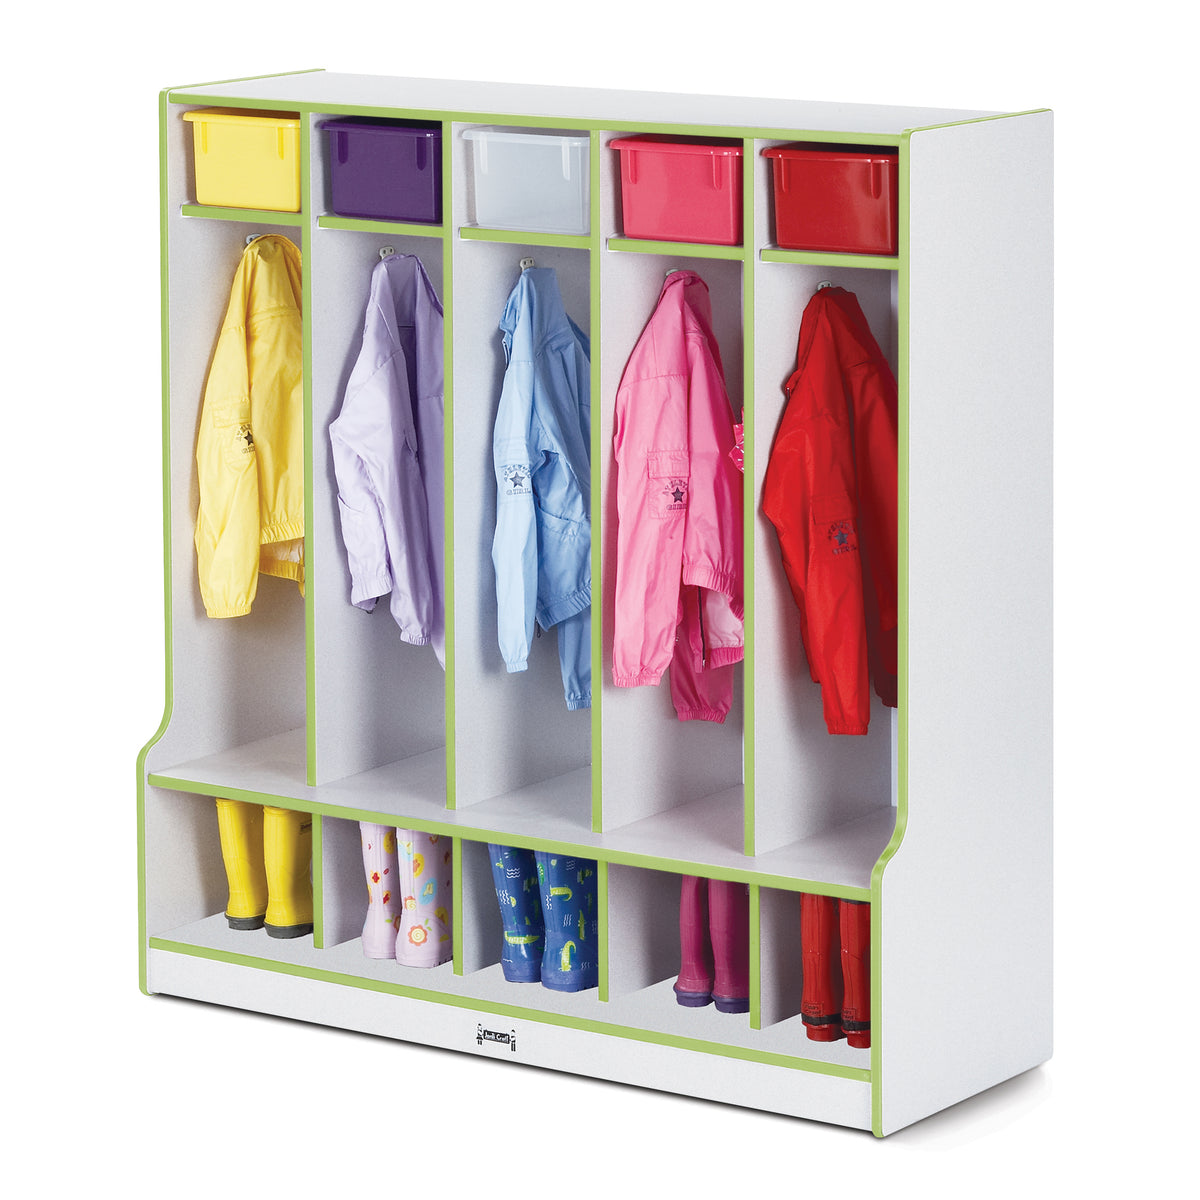 0468JCWW130, Rainbow Accents 5 Section Coat Locker with Step - Key Lime Green